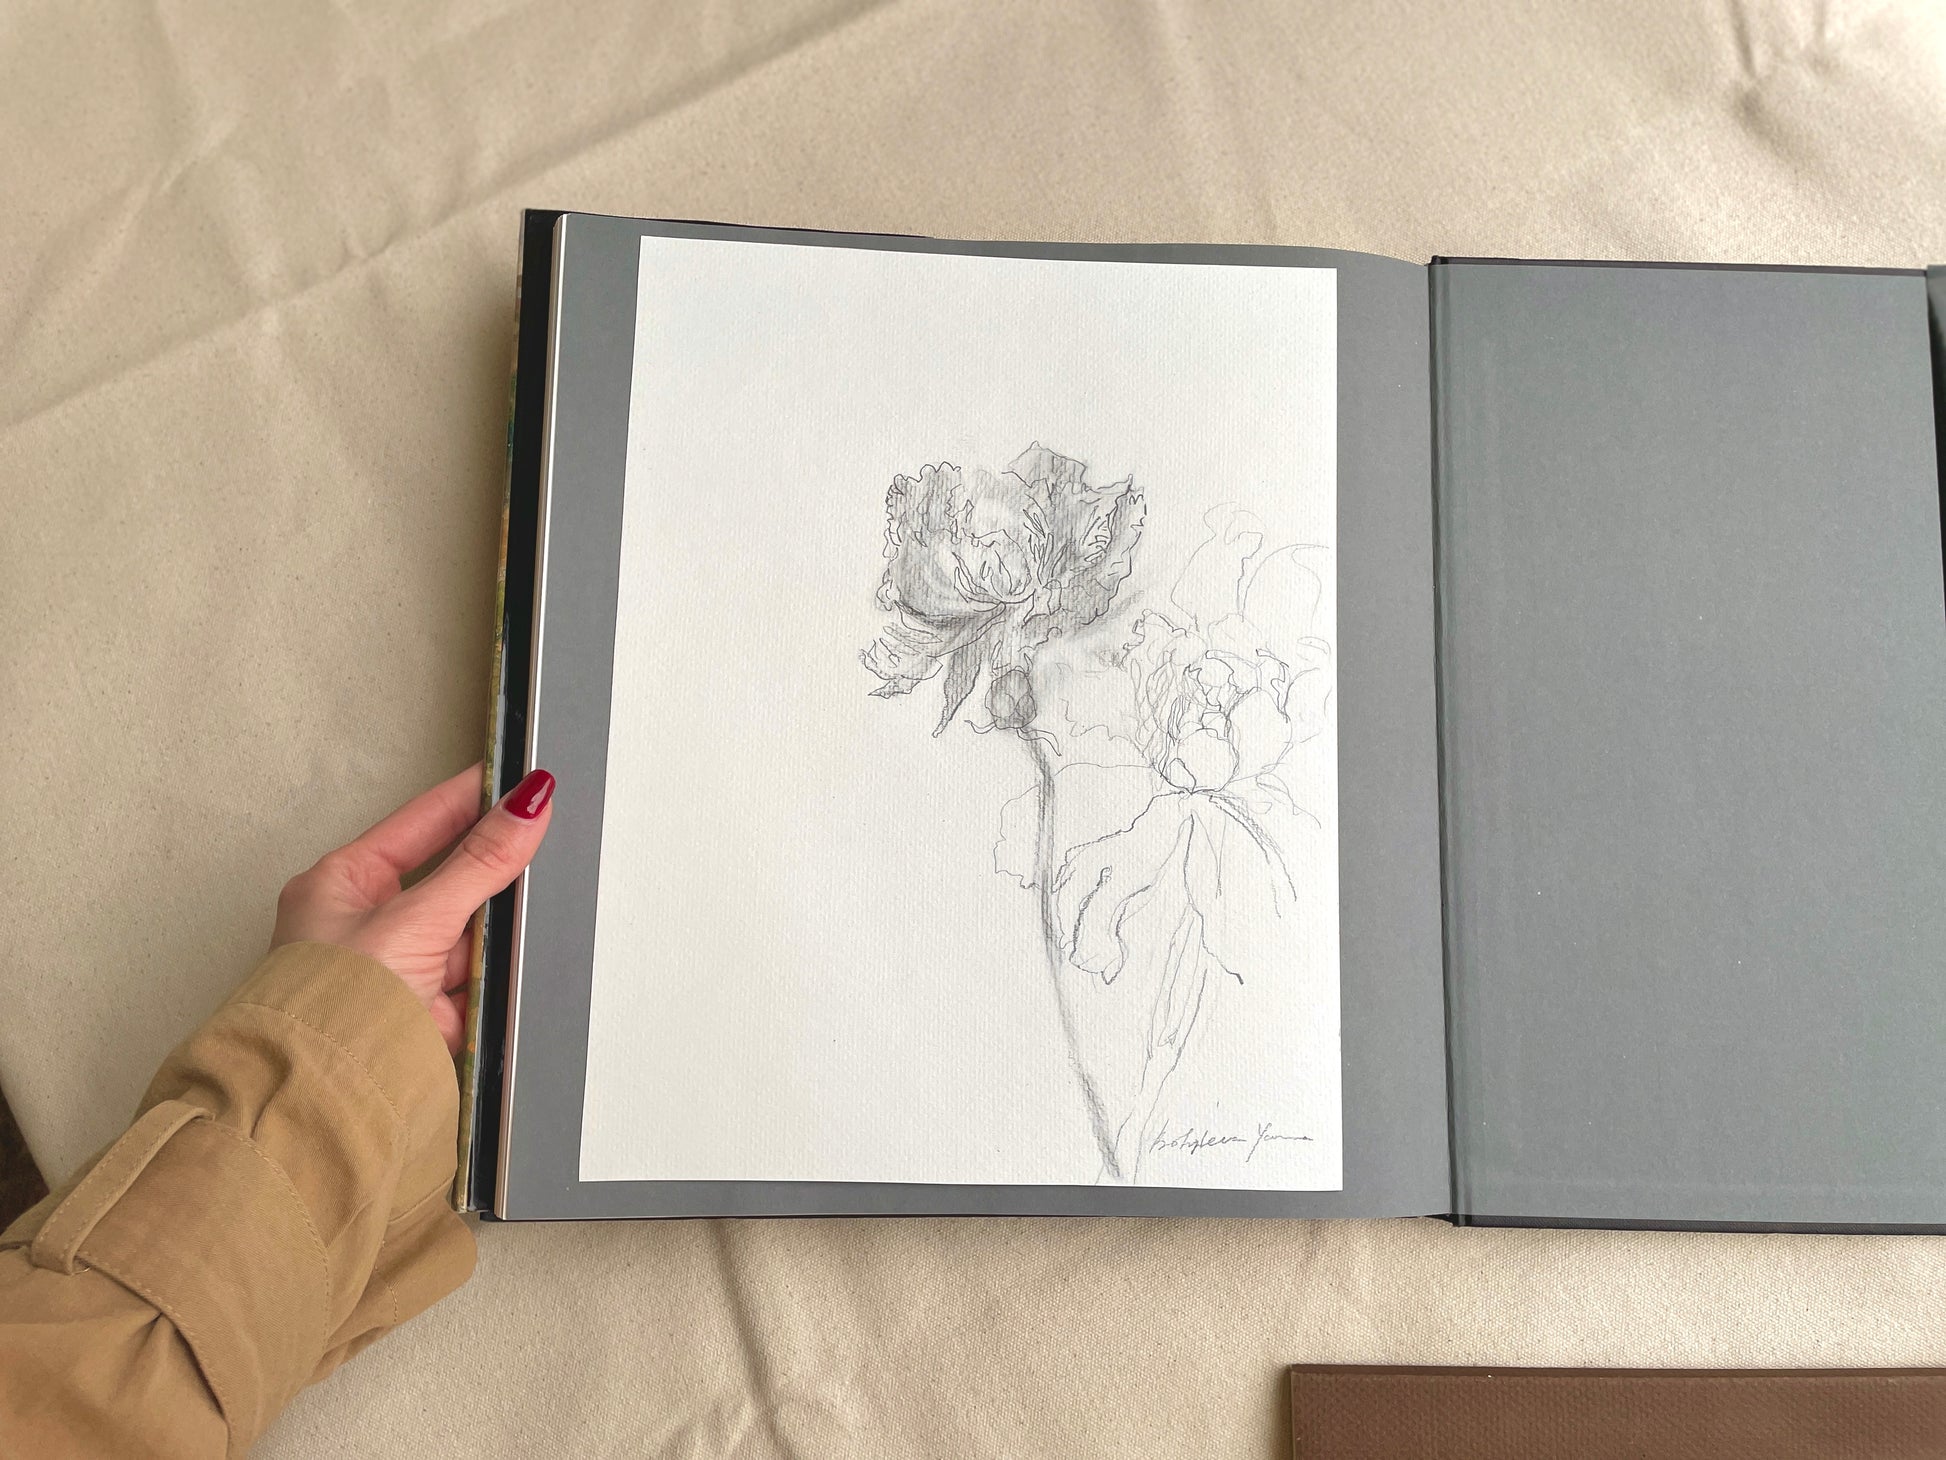 Two peonies in graphite pencil on a textured beige background